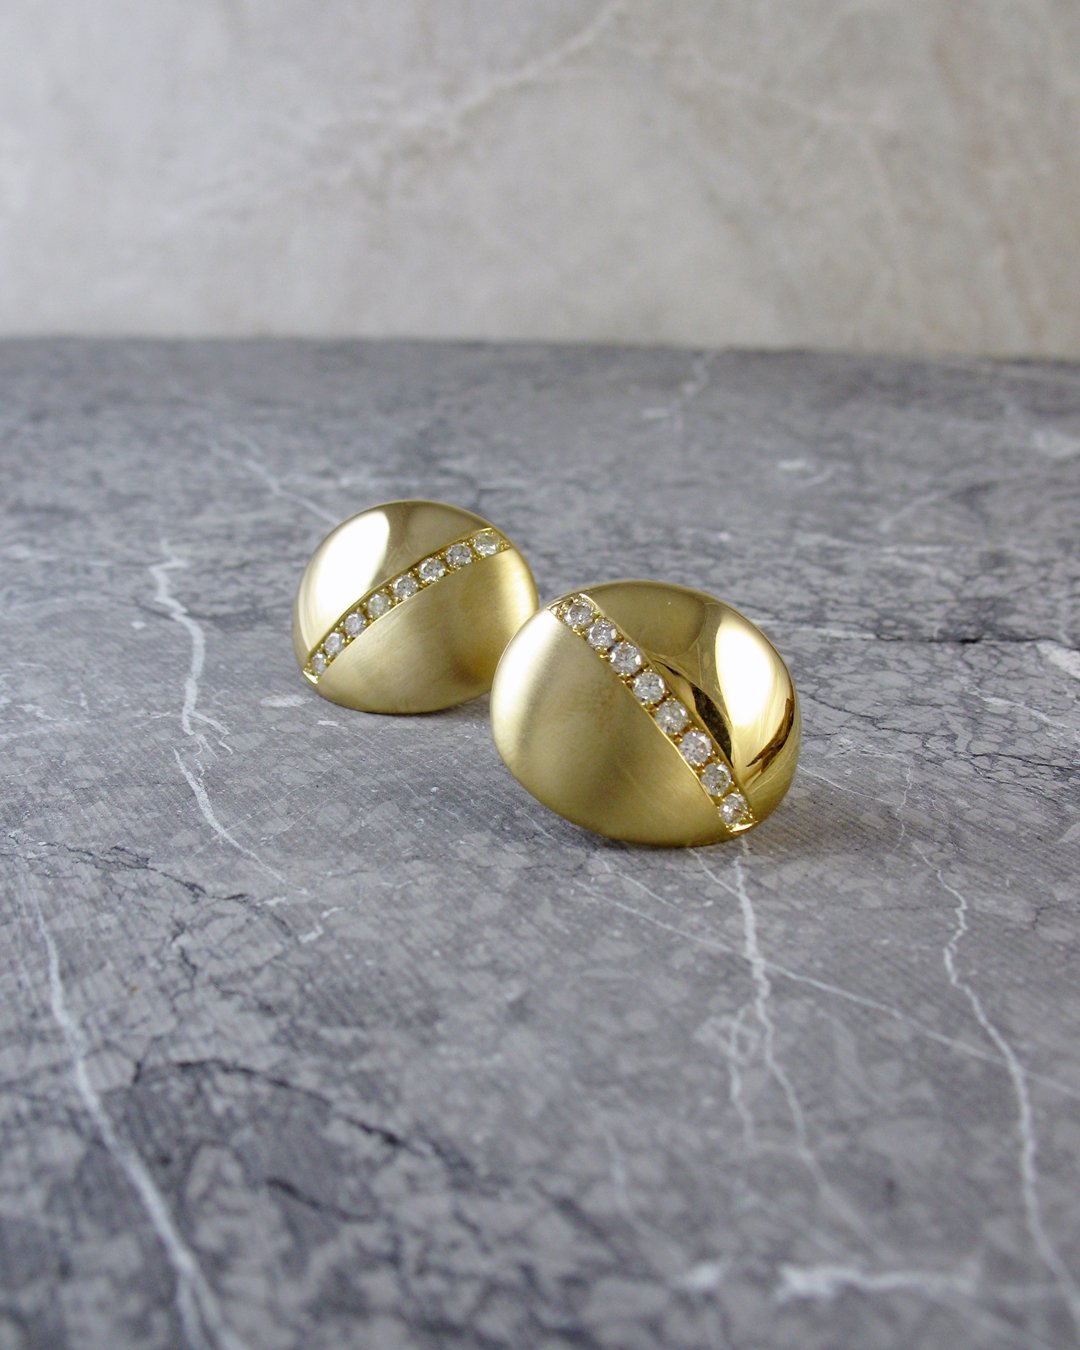 A pair of big and bold gold and diamond clip earrings